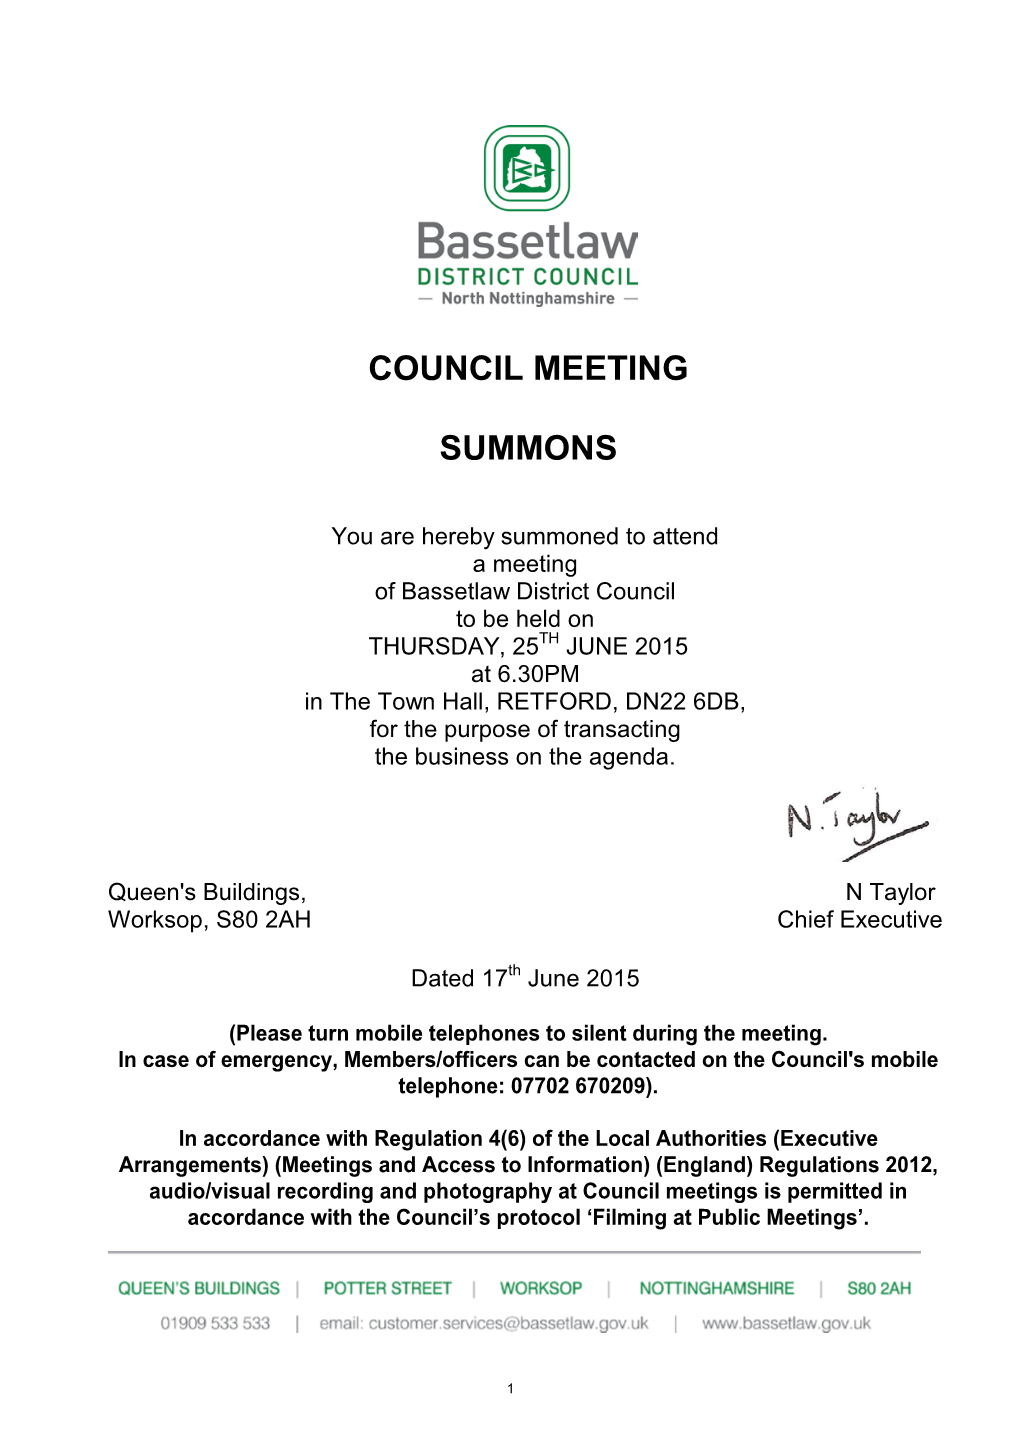 Council Meeting Summons